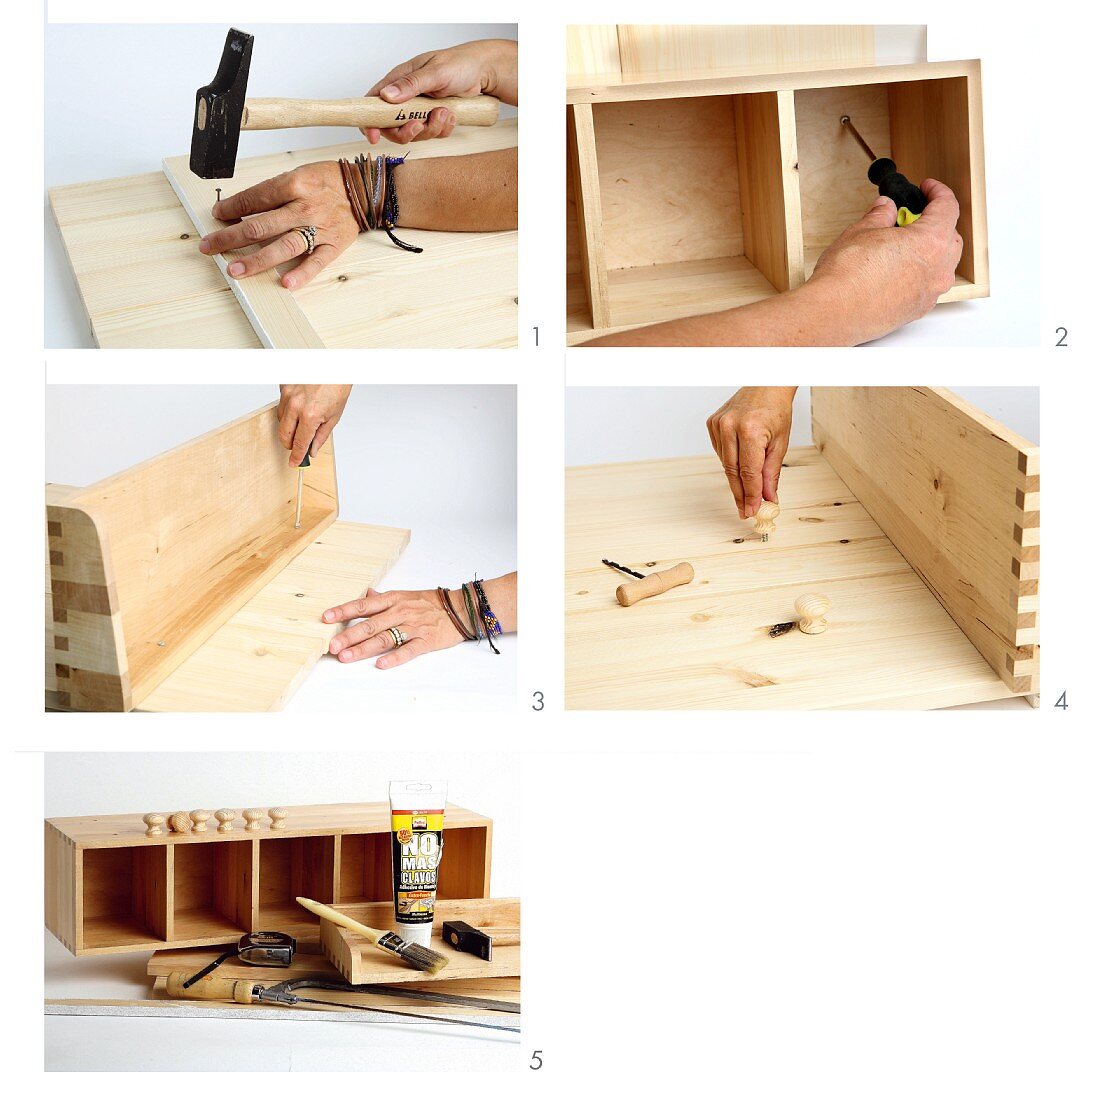 Building a wooden wall storage unit and back panel, spruce, the corners are joined together with screws